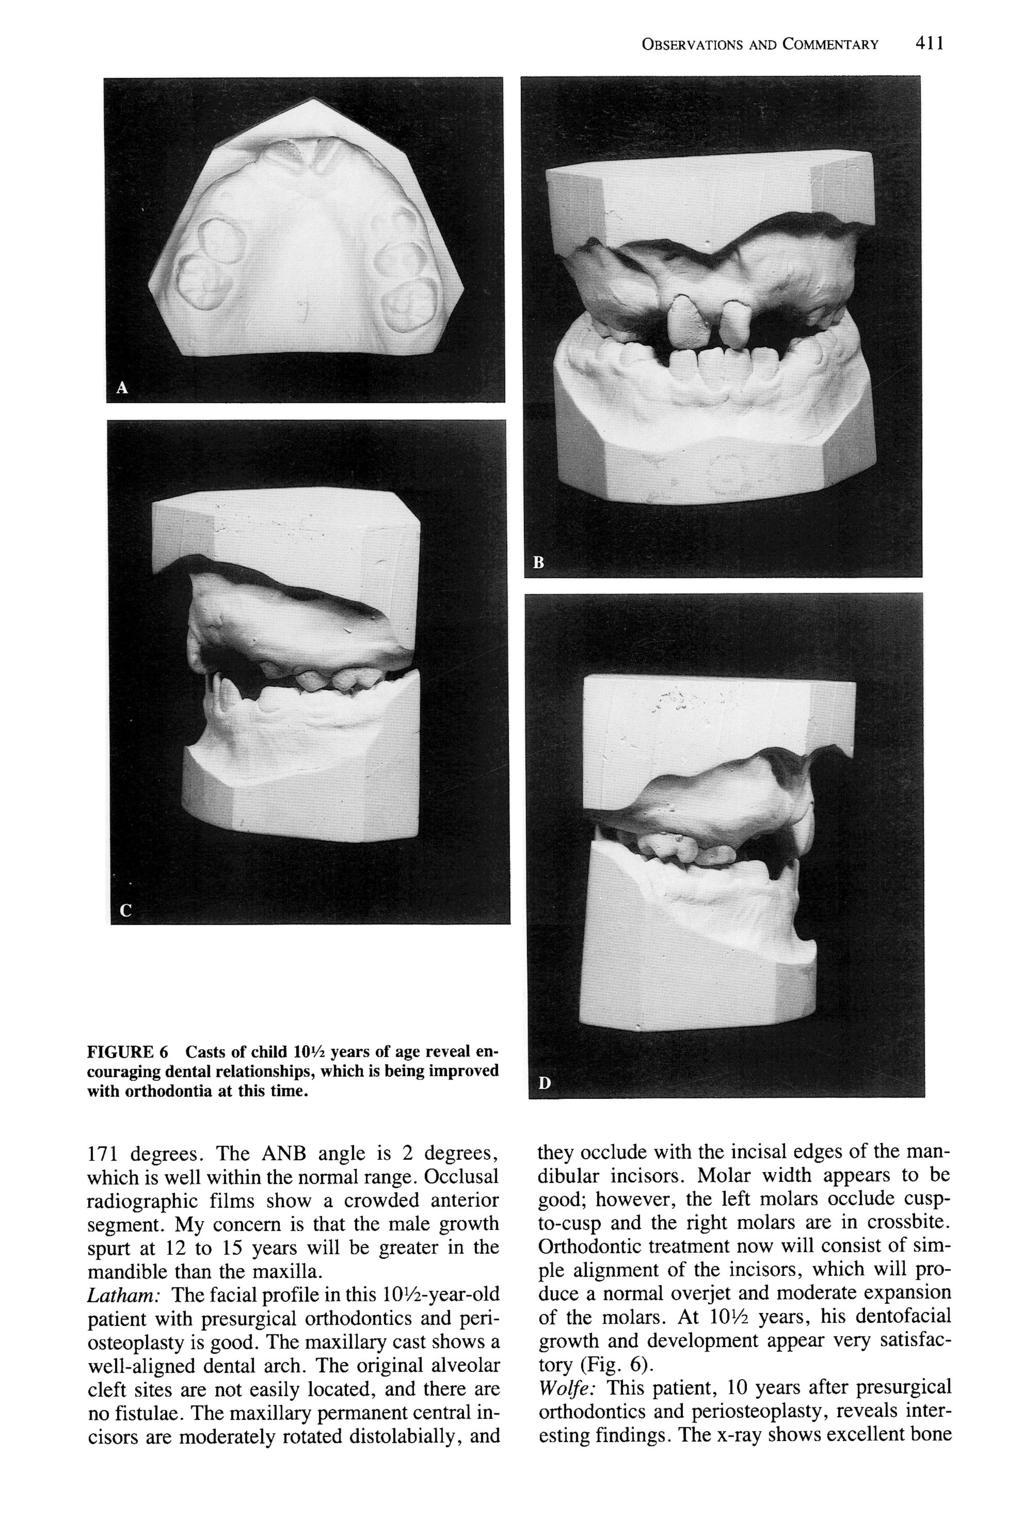 OBSERVATIONS AND COMMENTARY 411 FIGURE 6 Casts of child 10% years of age reveal encouraging dental relationships, which is being improved with orthodontia at this time. 171 degrees.